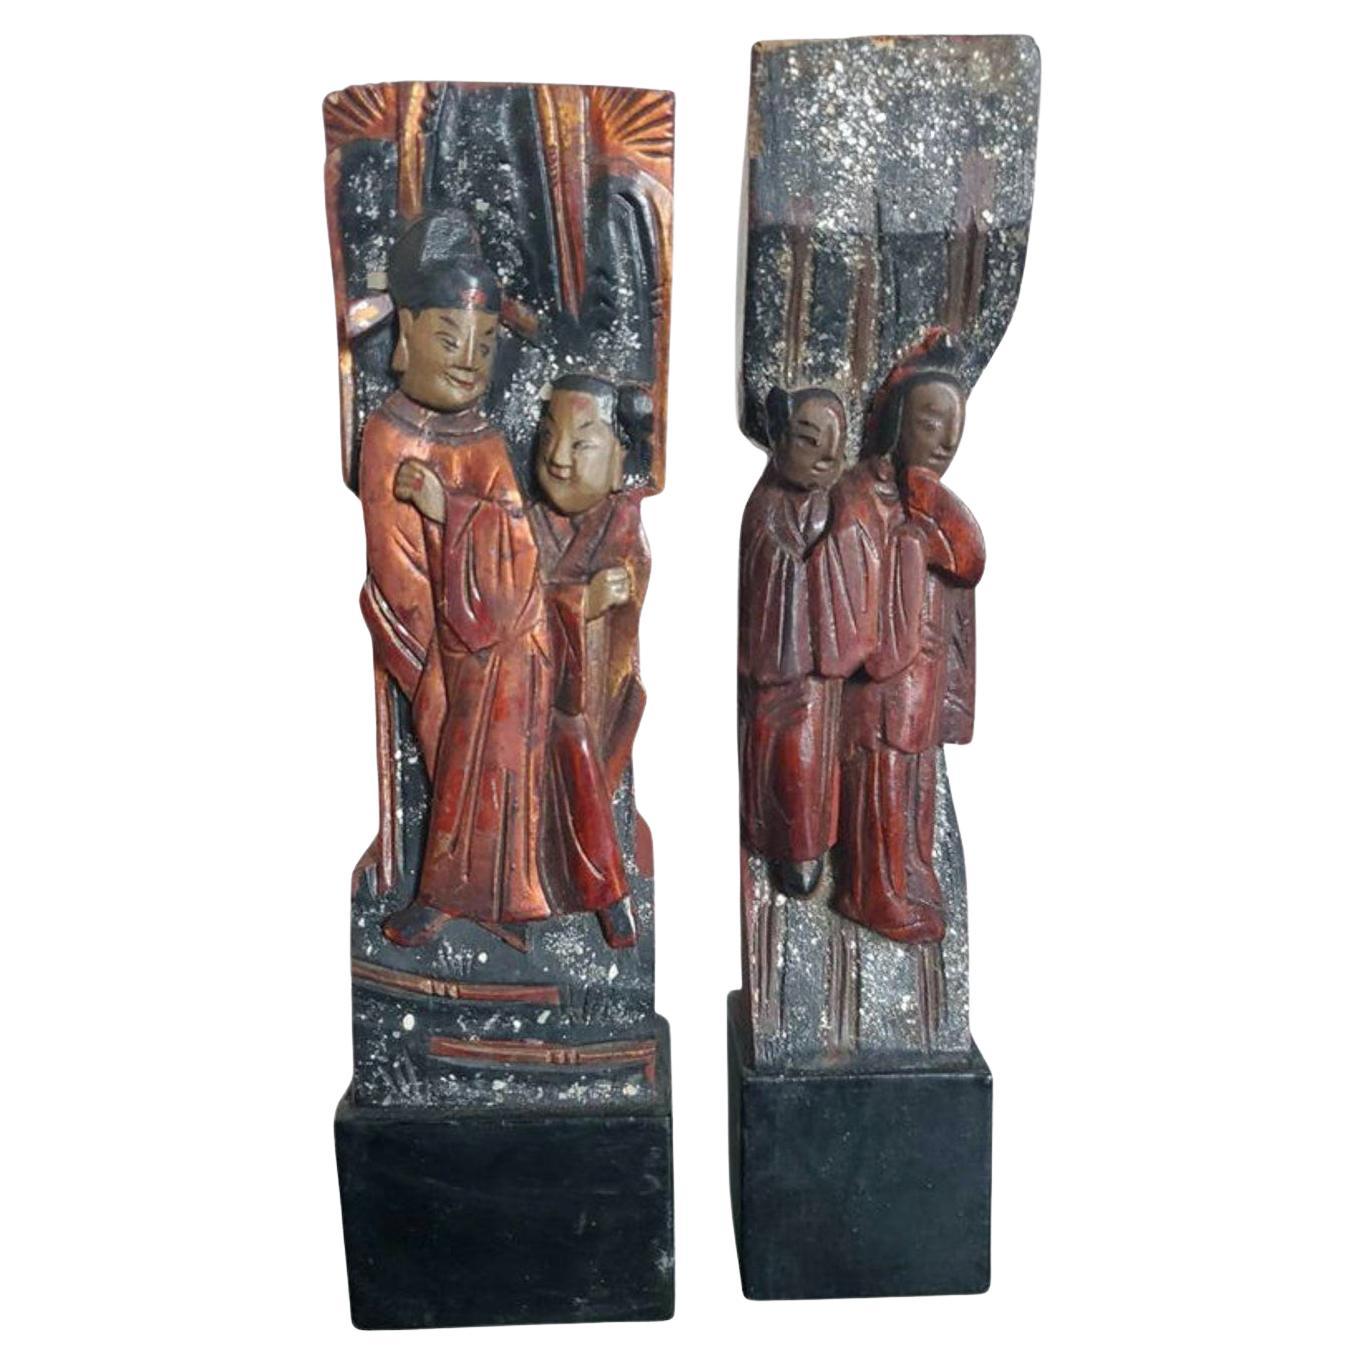 Pair of Qing Dynasty Chinese Religious Temple Architectural Ornament